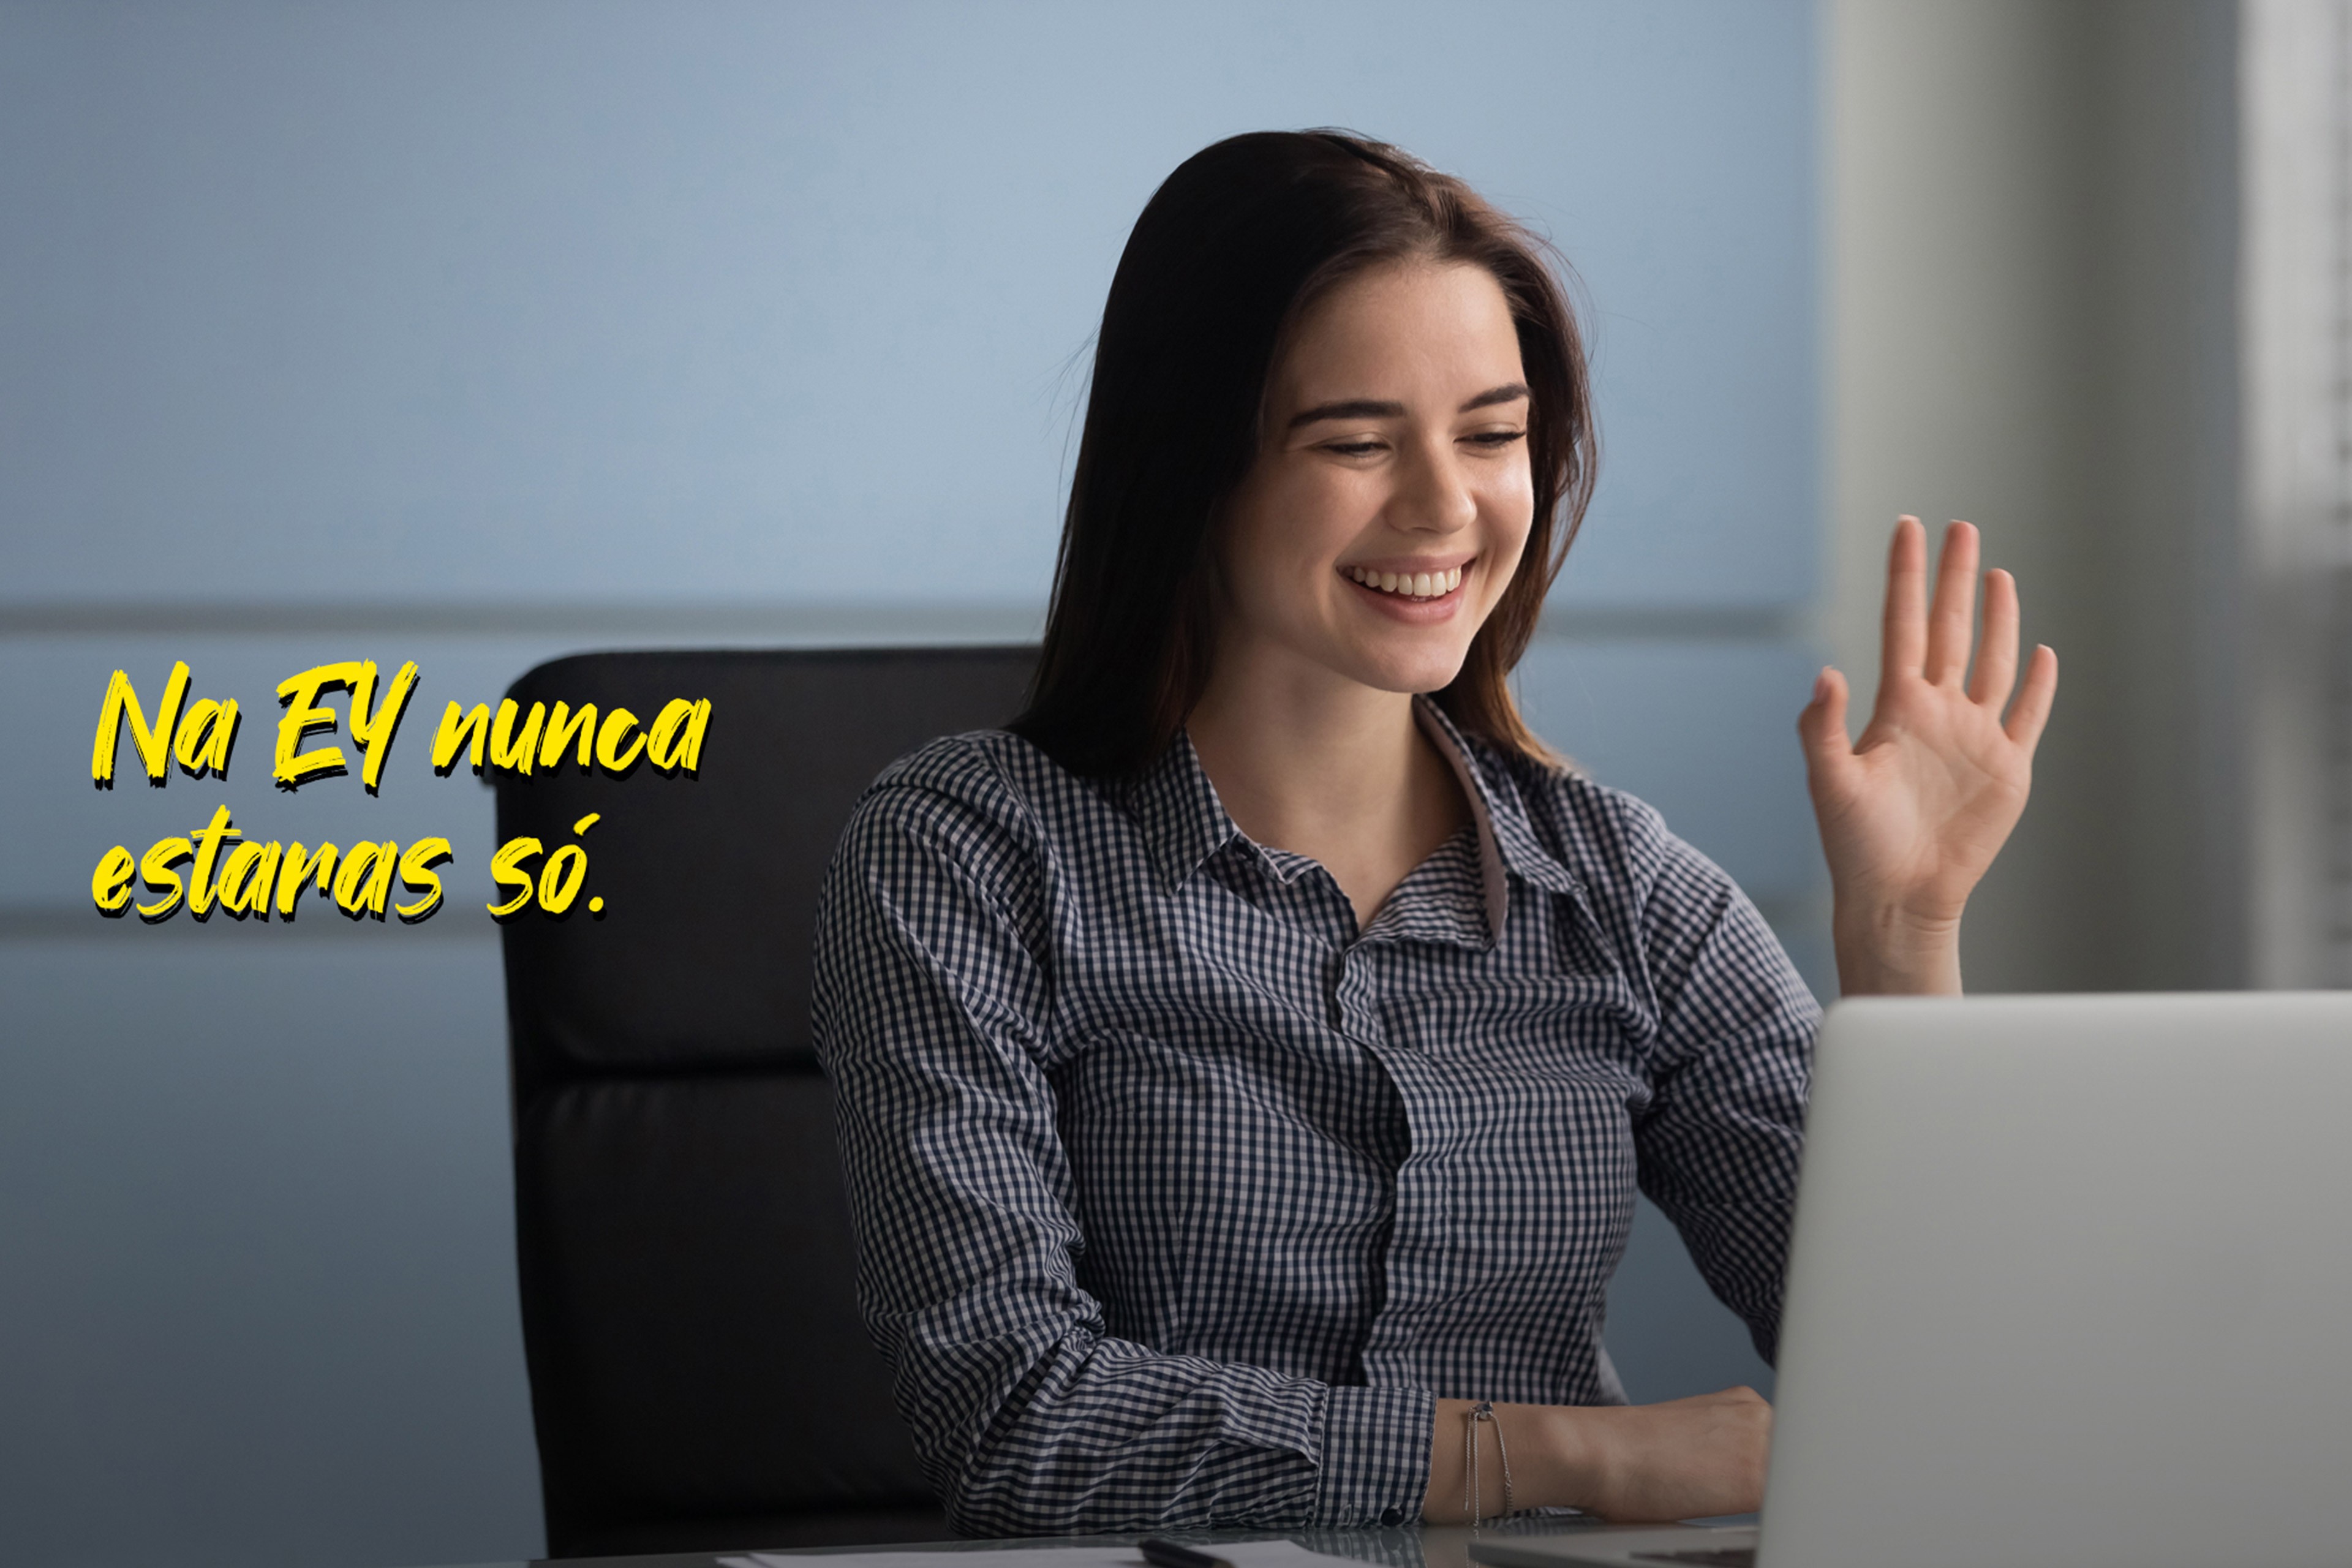 EY lady employee smiling with raised hand